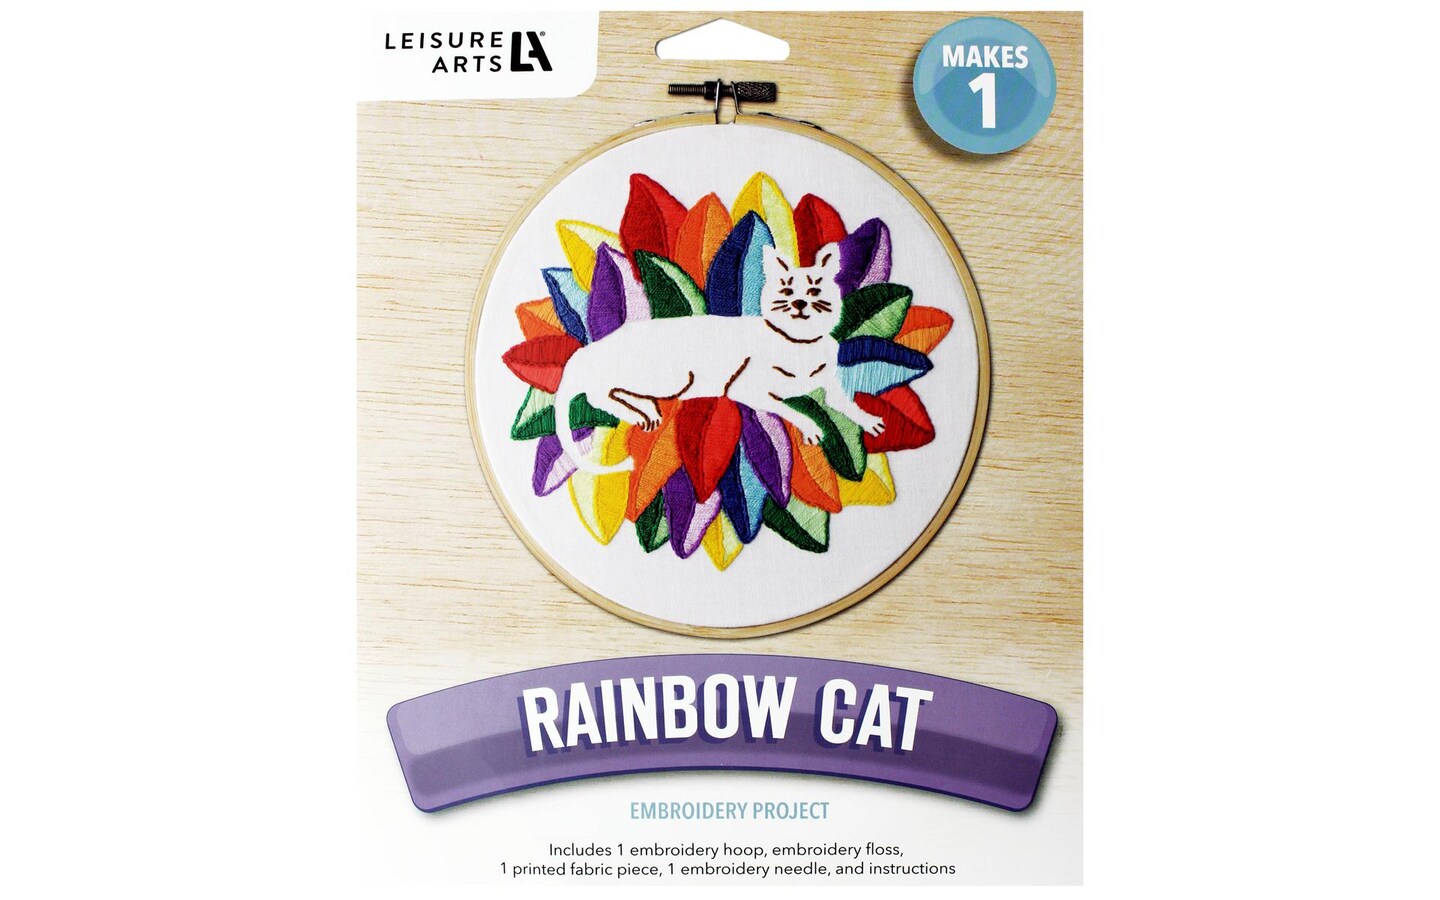 Leisure Arts Embroidery Kit 6 Rainbow Cat - embroidery kit for